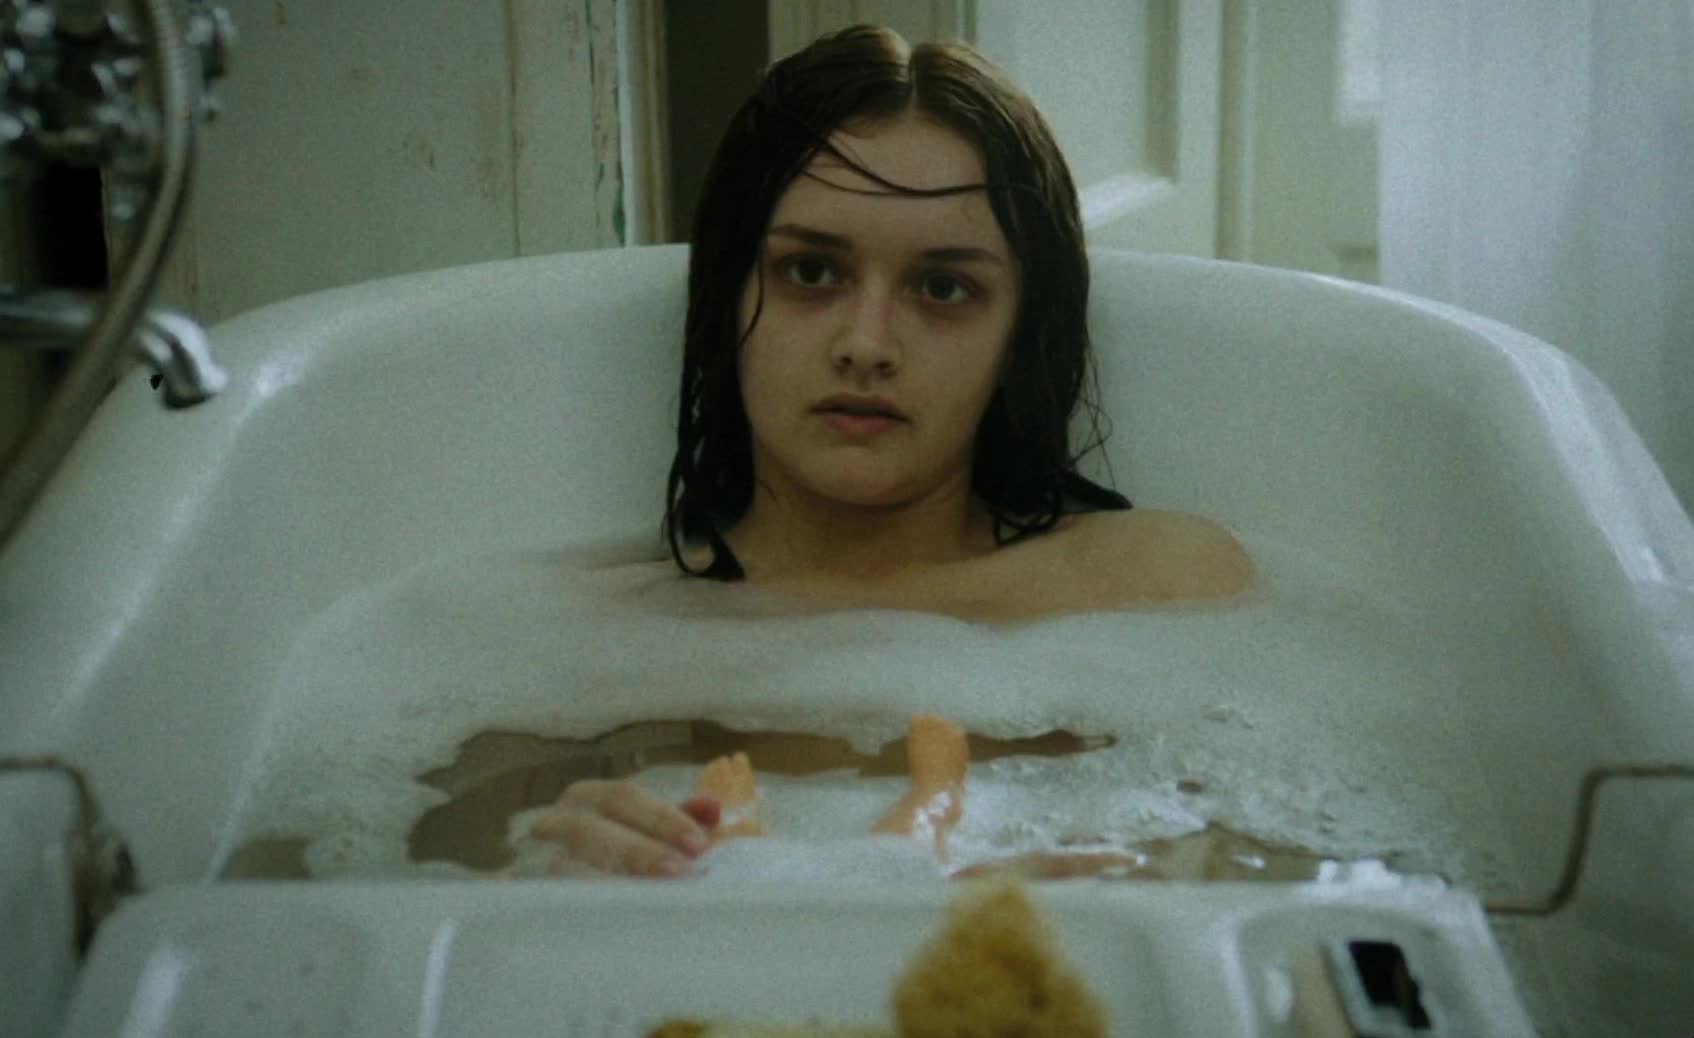 Olivia Cooke - The Quiet Ones, Horror movie nudes, Olivia Cooke, gif video.